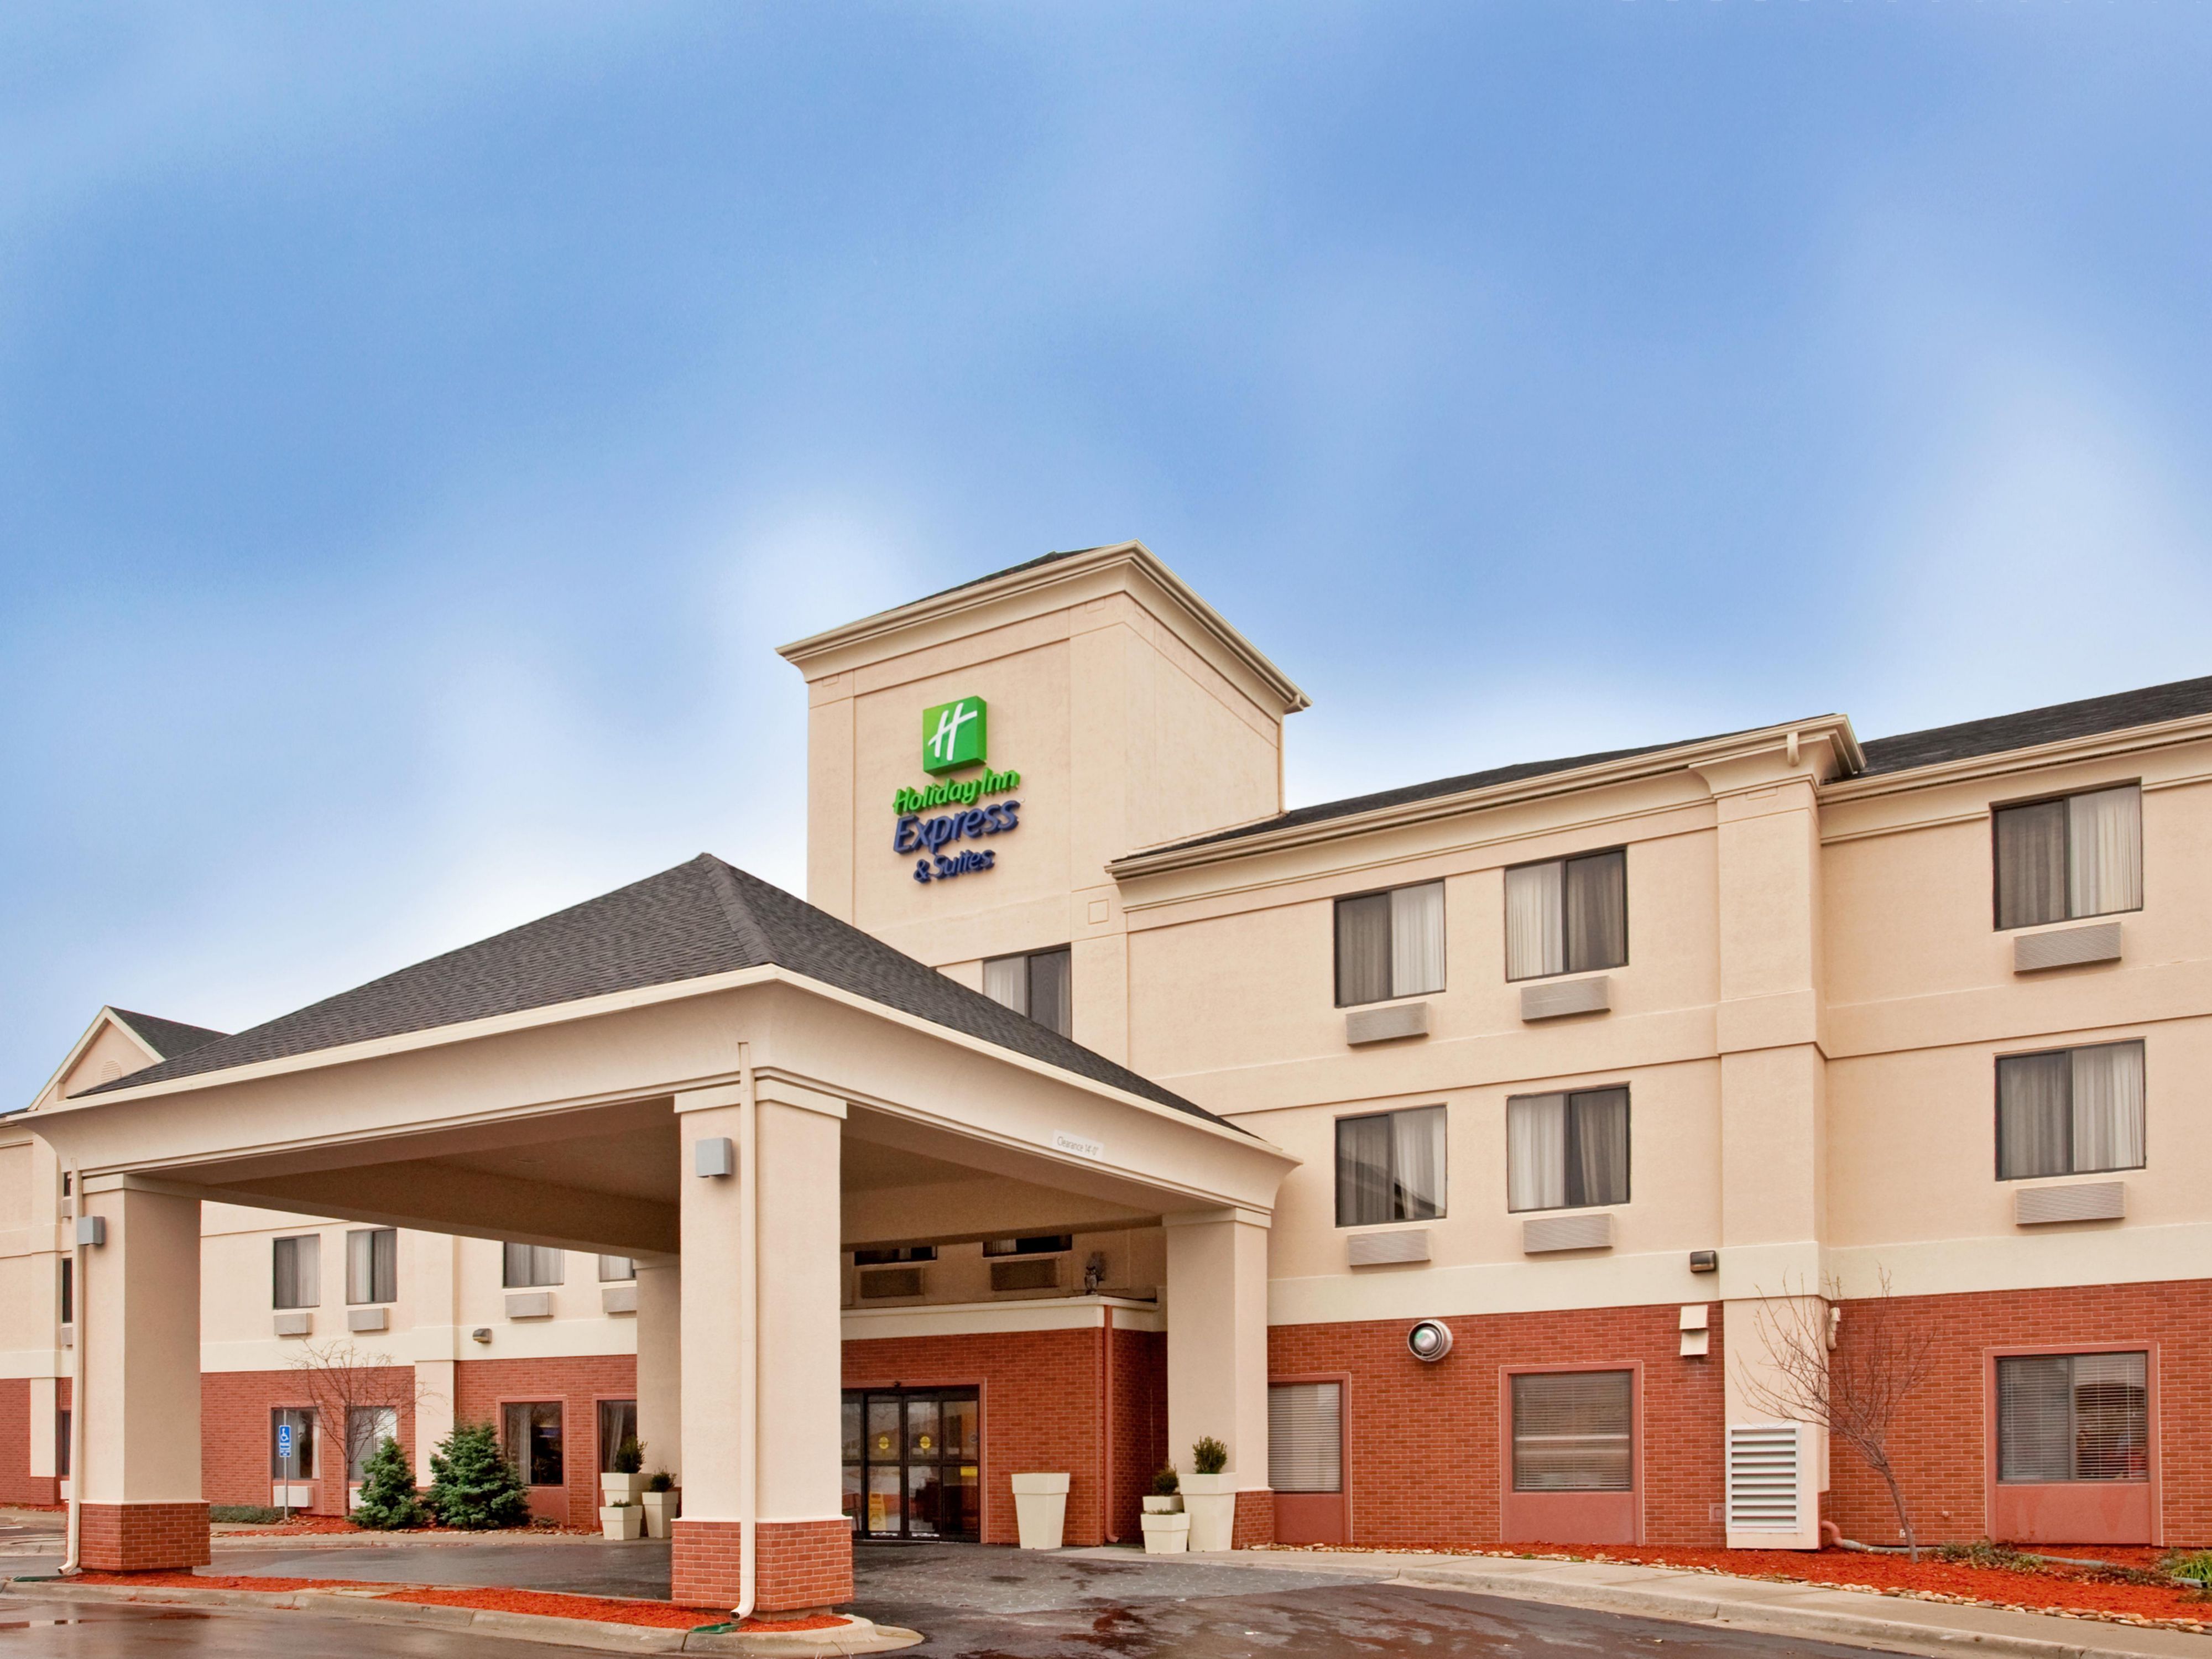 Budget Hotels in Lee's Summit, MO | Holiday Inn Express Lee's Summit